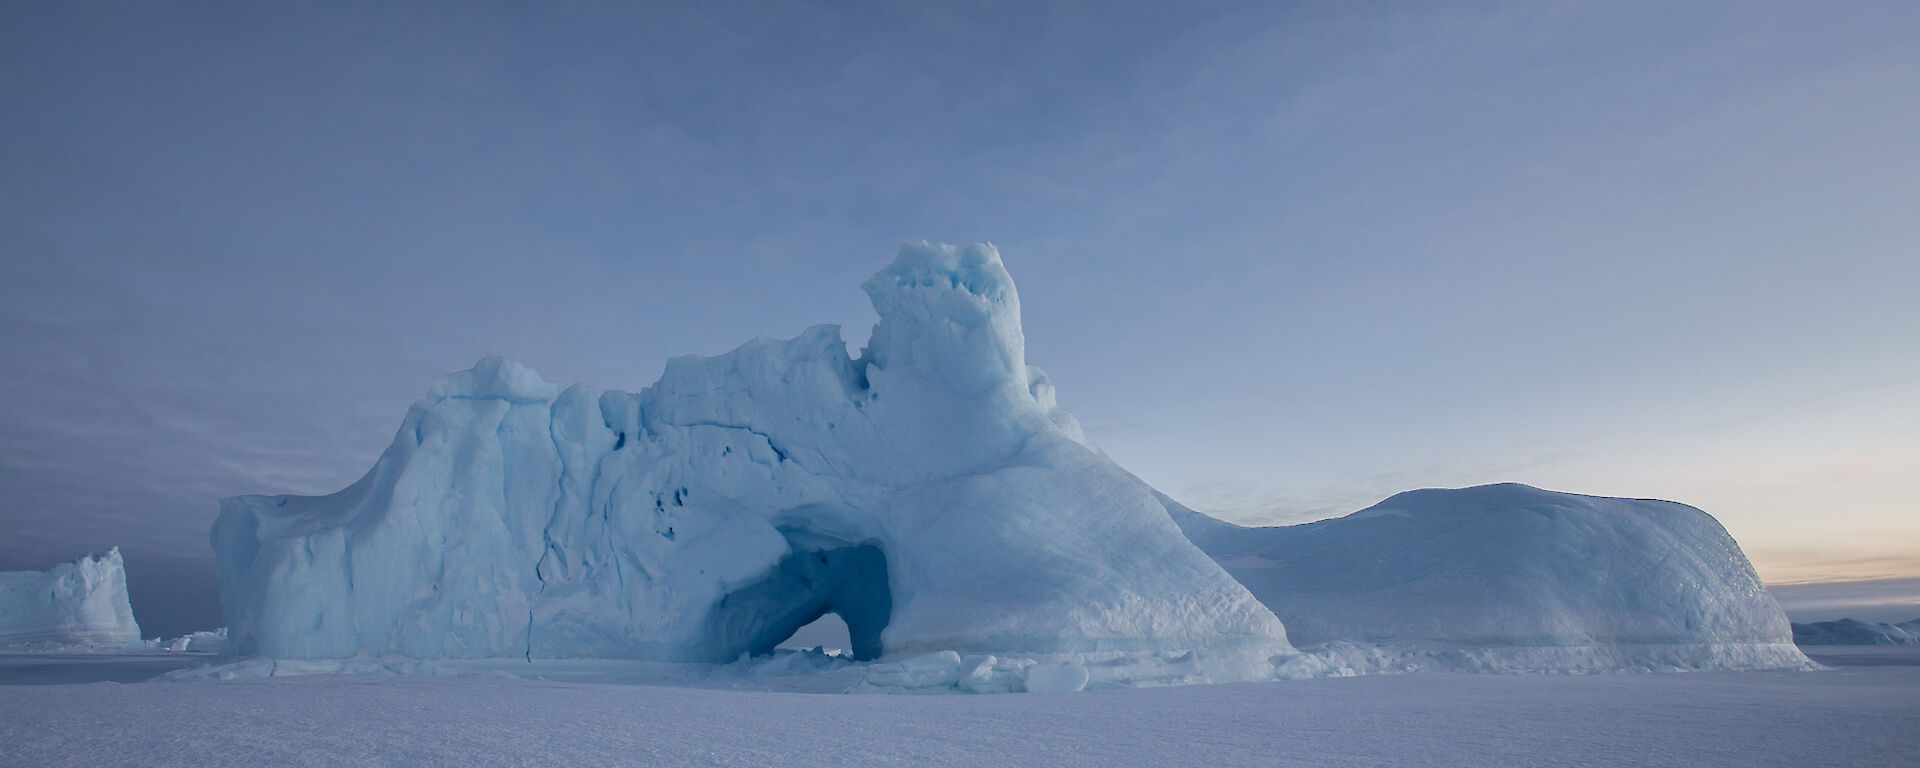 An ice burg locked in the sea ice that has a large hole weathered in the side.